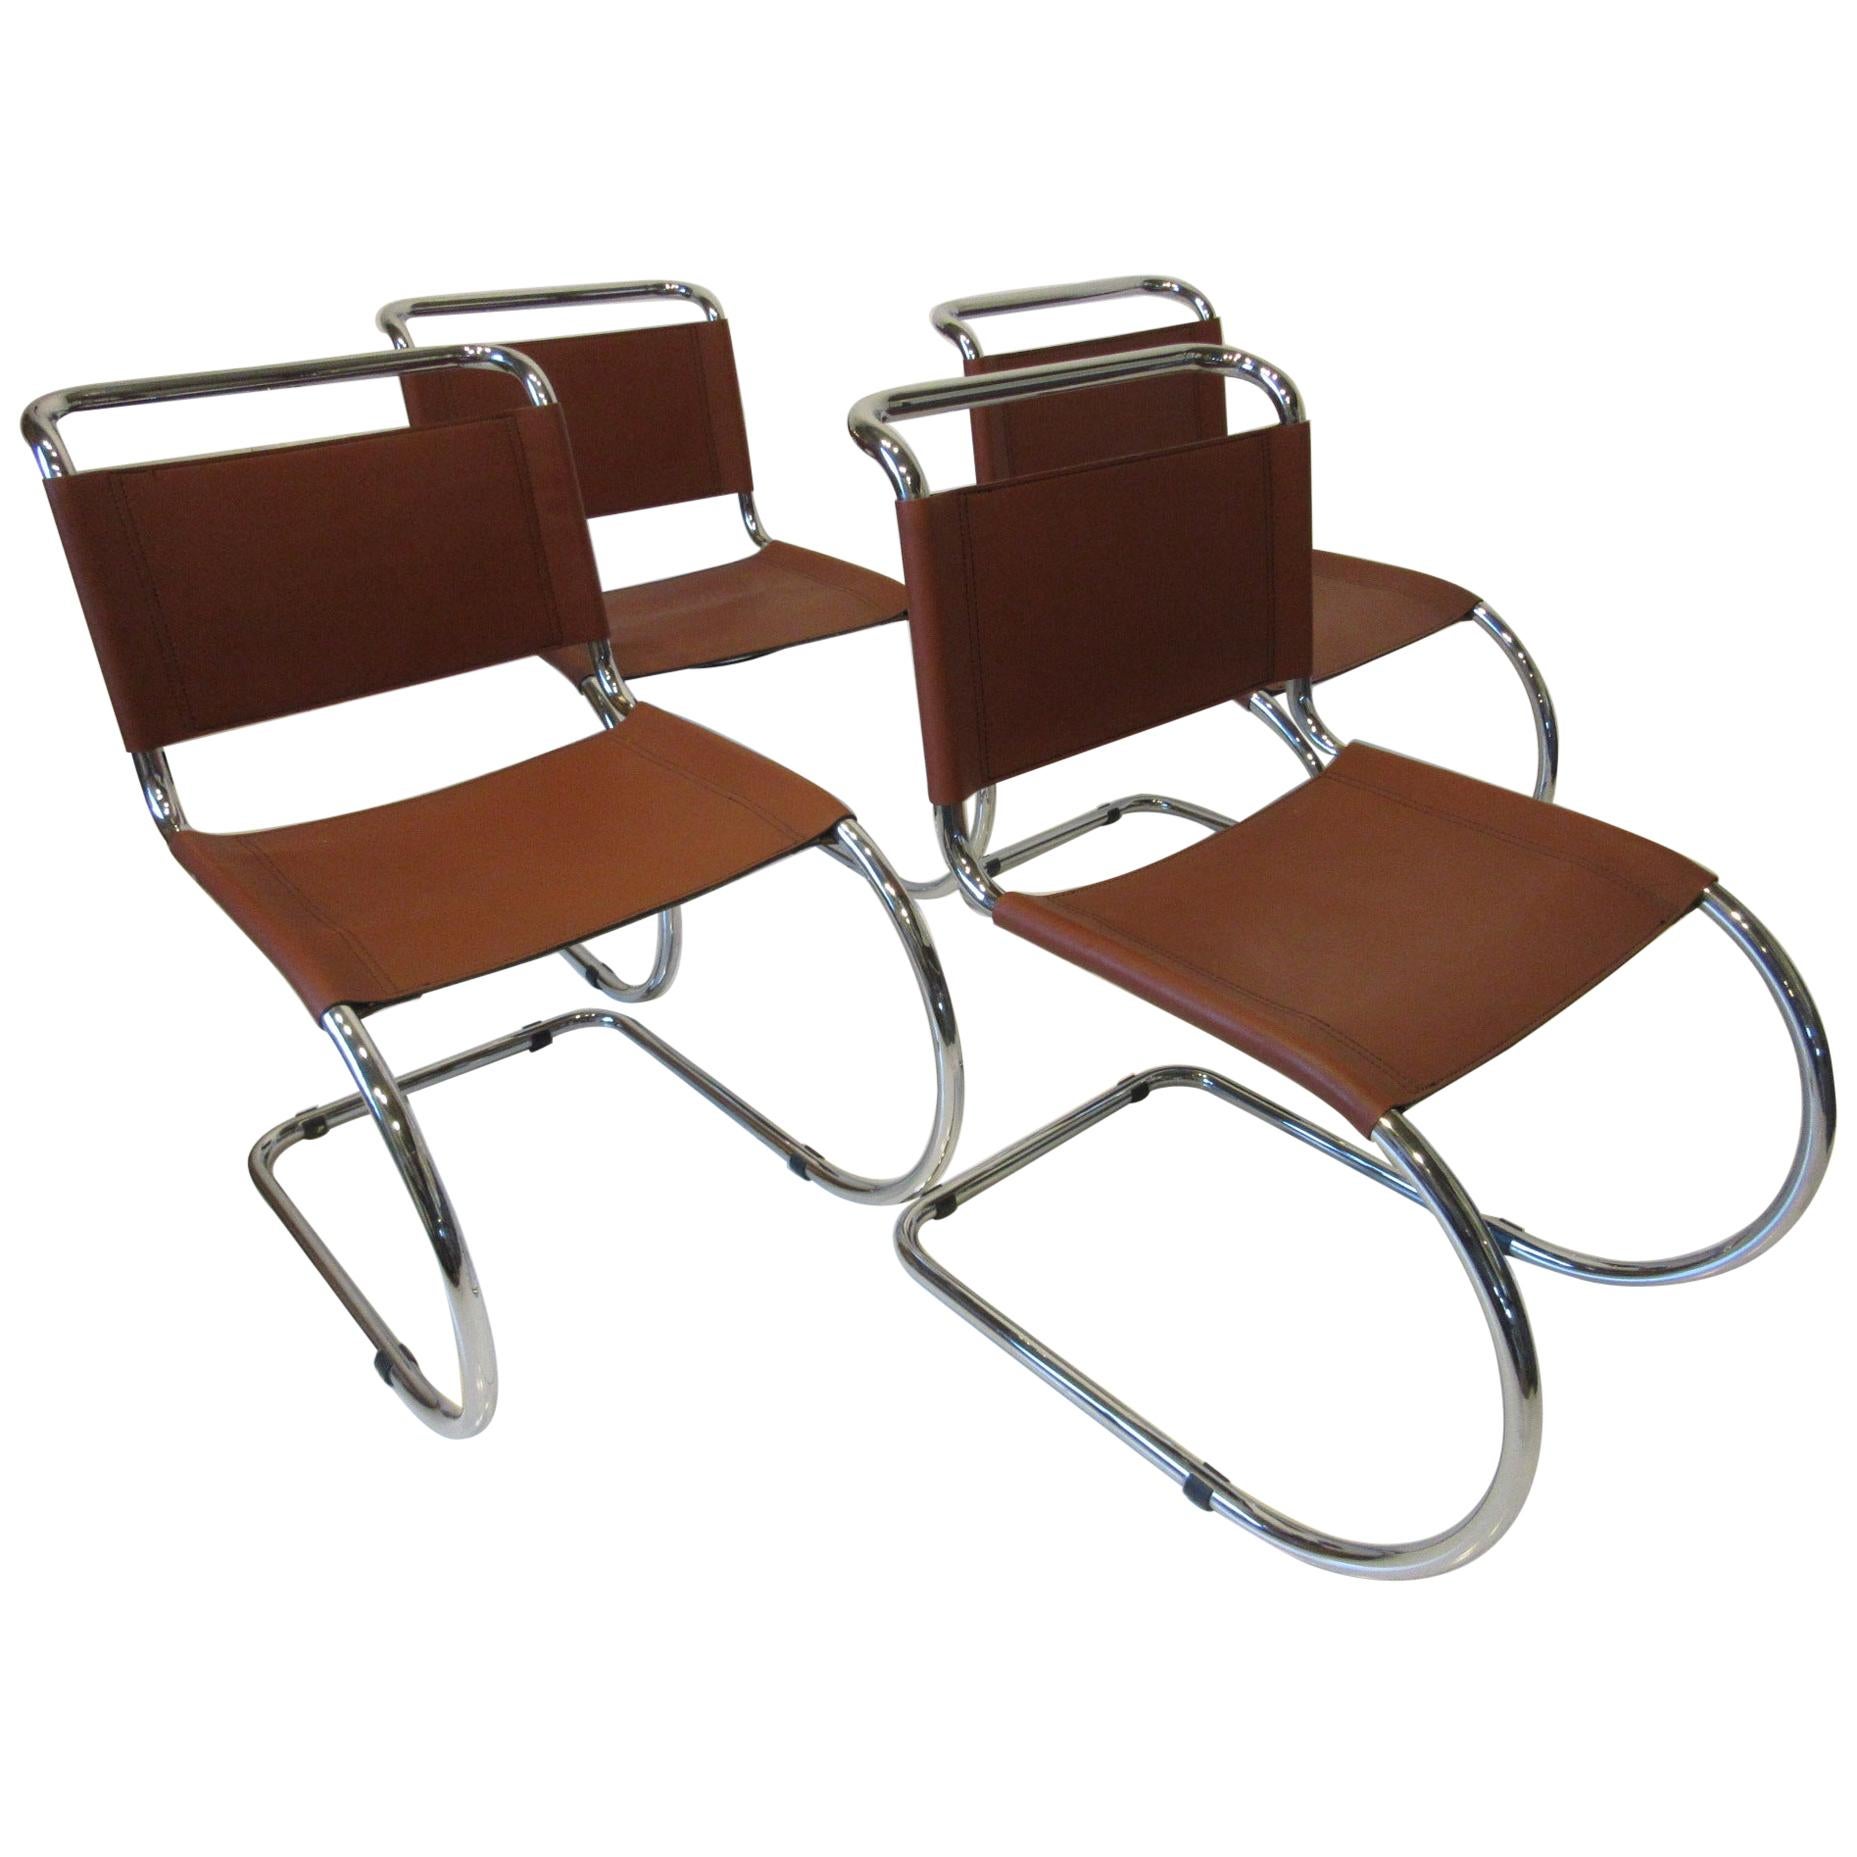 Ludwig Mies van der Rohe MR -10 Leather / Chrome Cantilever Dining Chairs